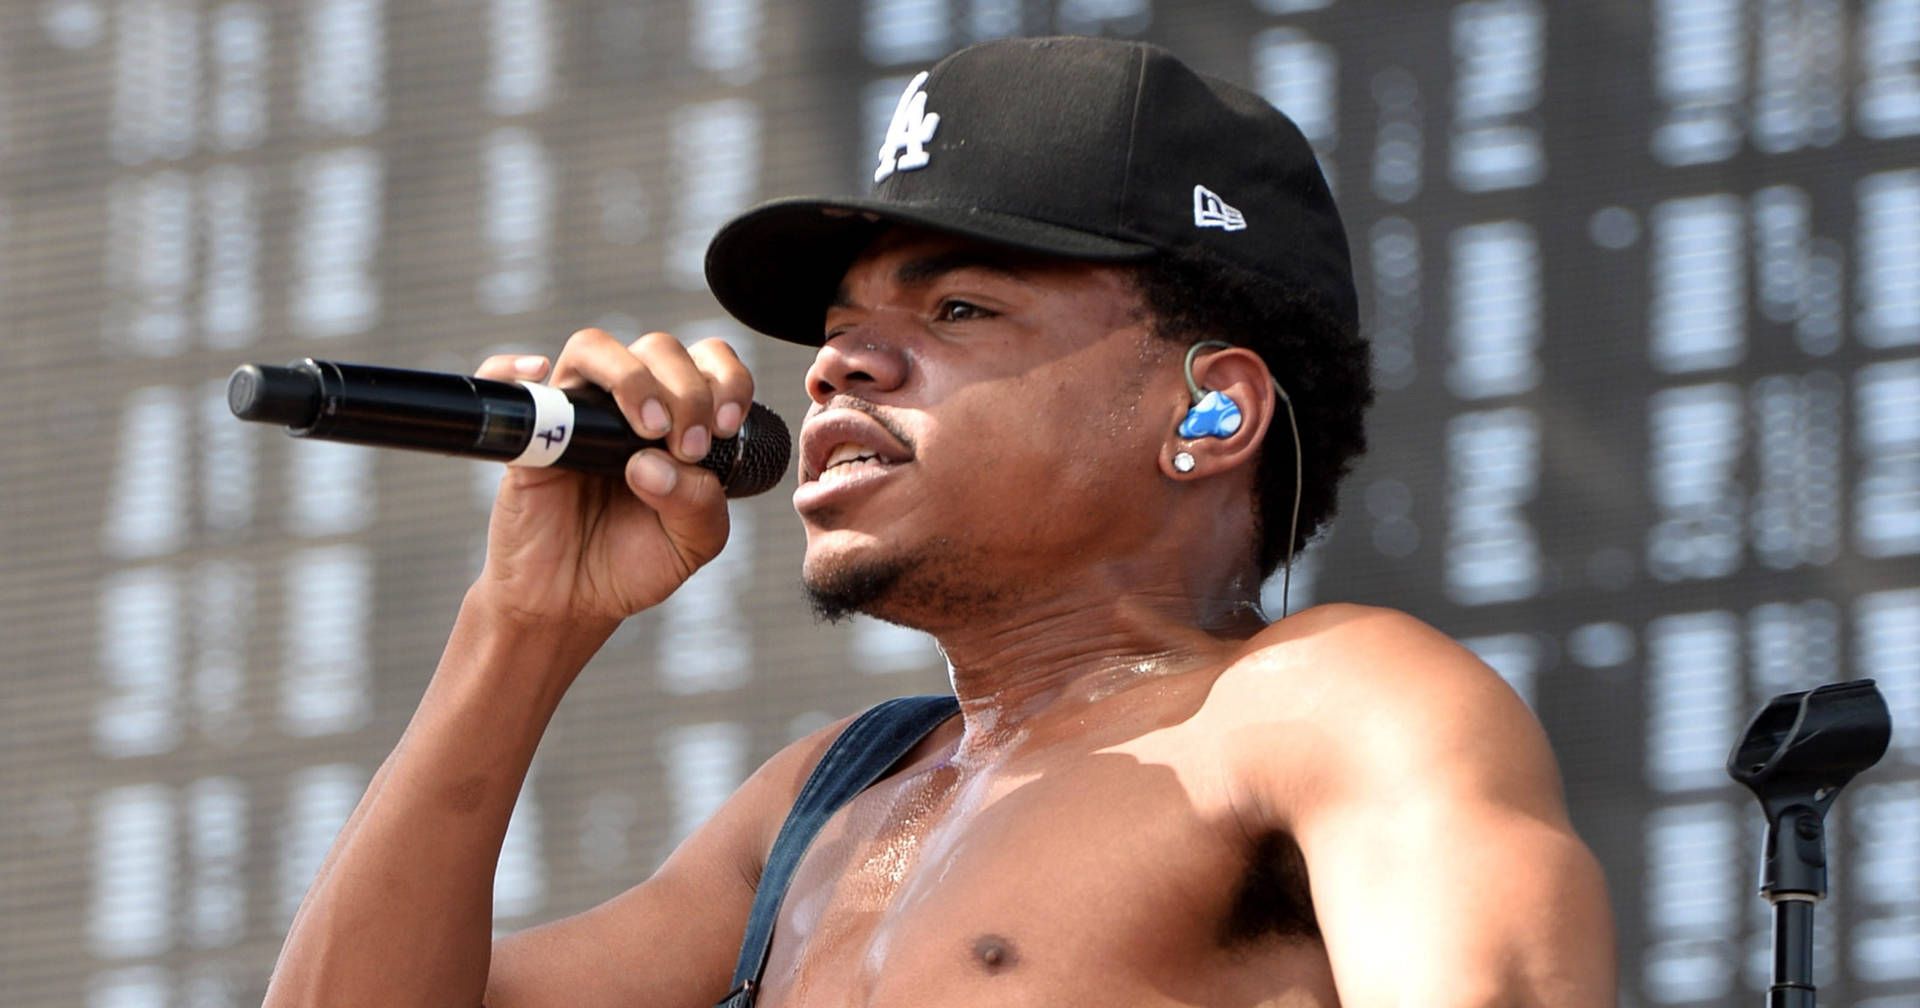 Download Shirtless Chance The Rapper Wallpaper